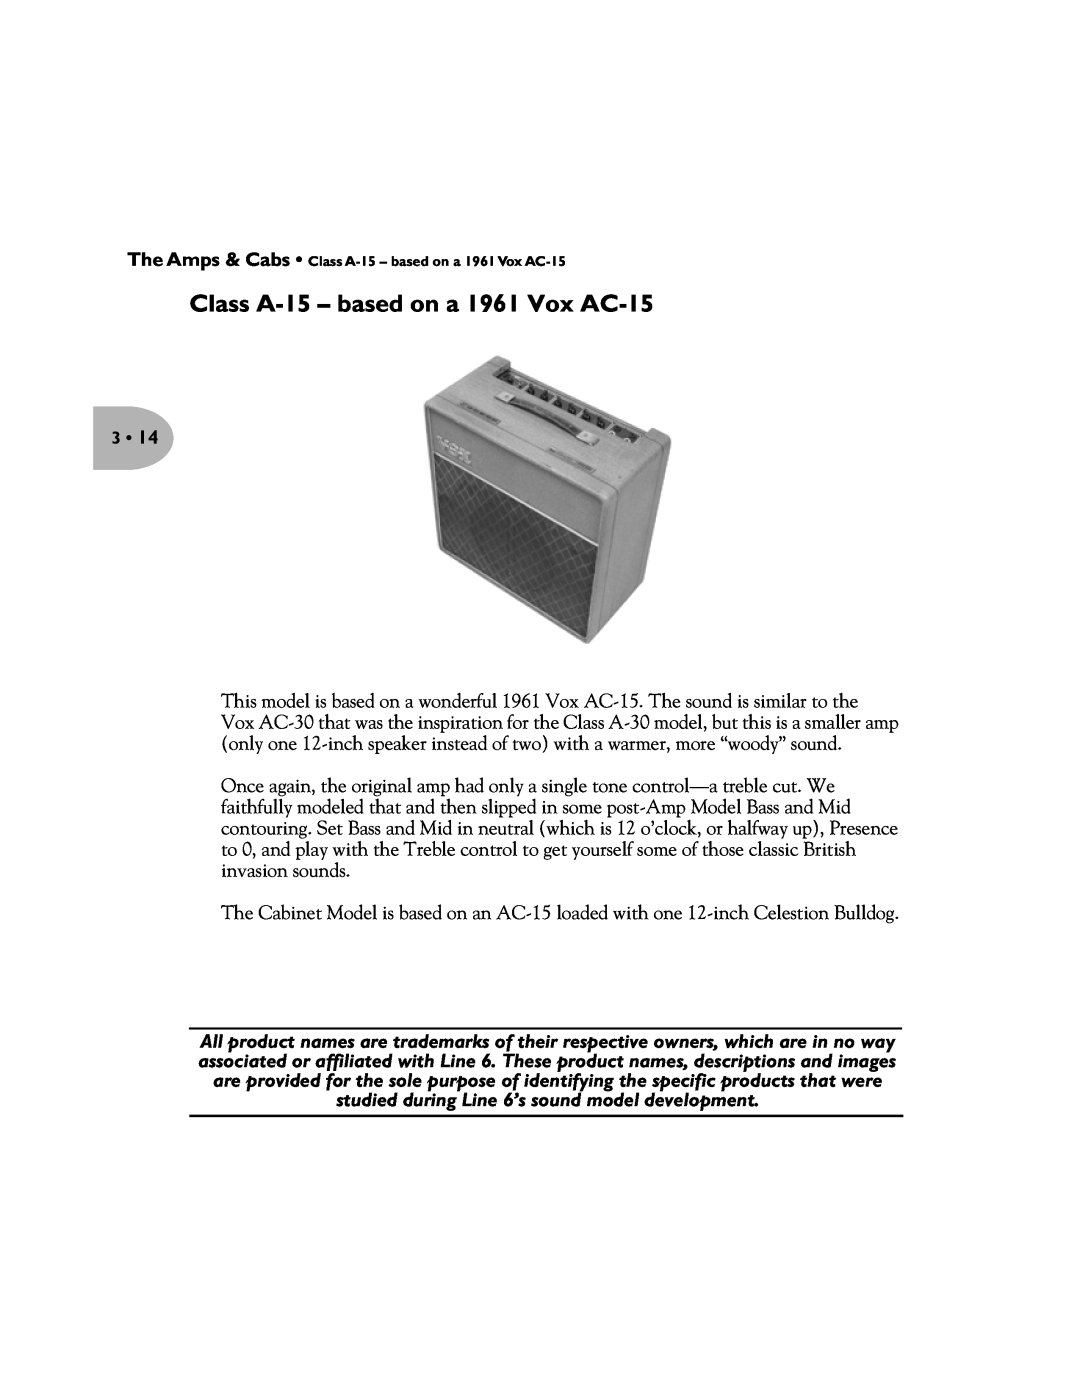 Line 6 Pilot's Handbook manual The Amps & Cabs Class A-15 - based on a 1961 Vox AC-15 